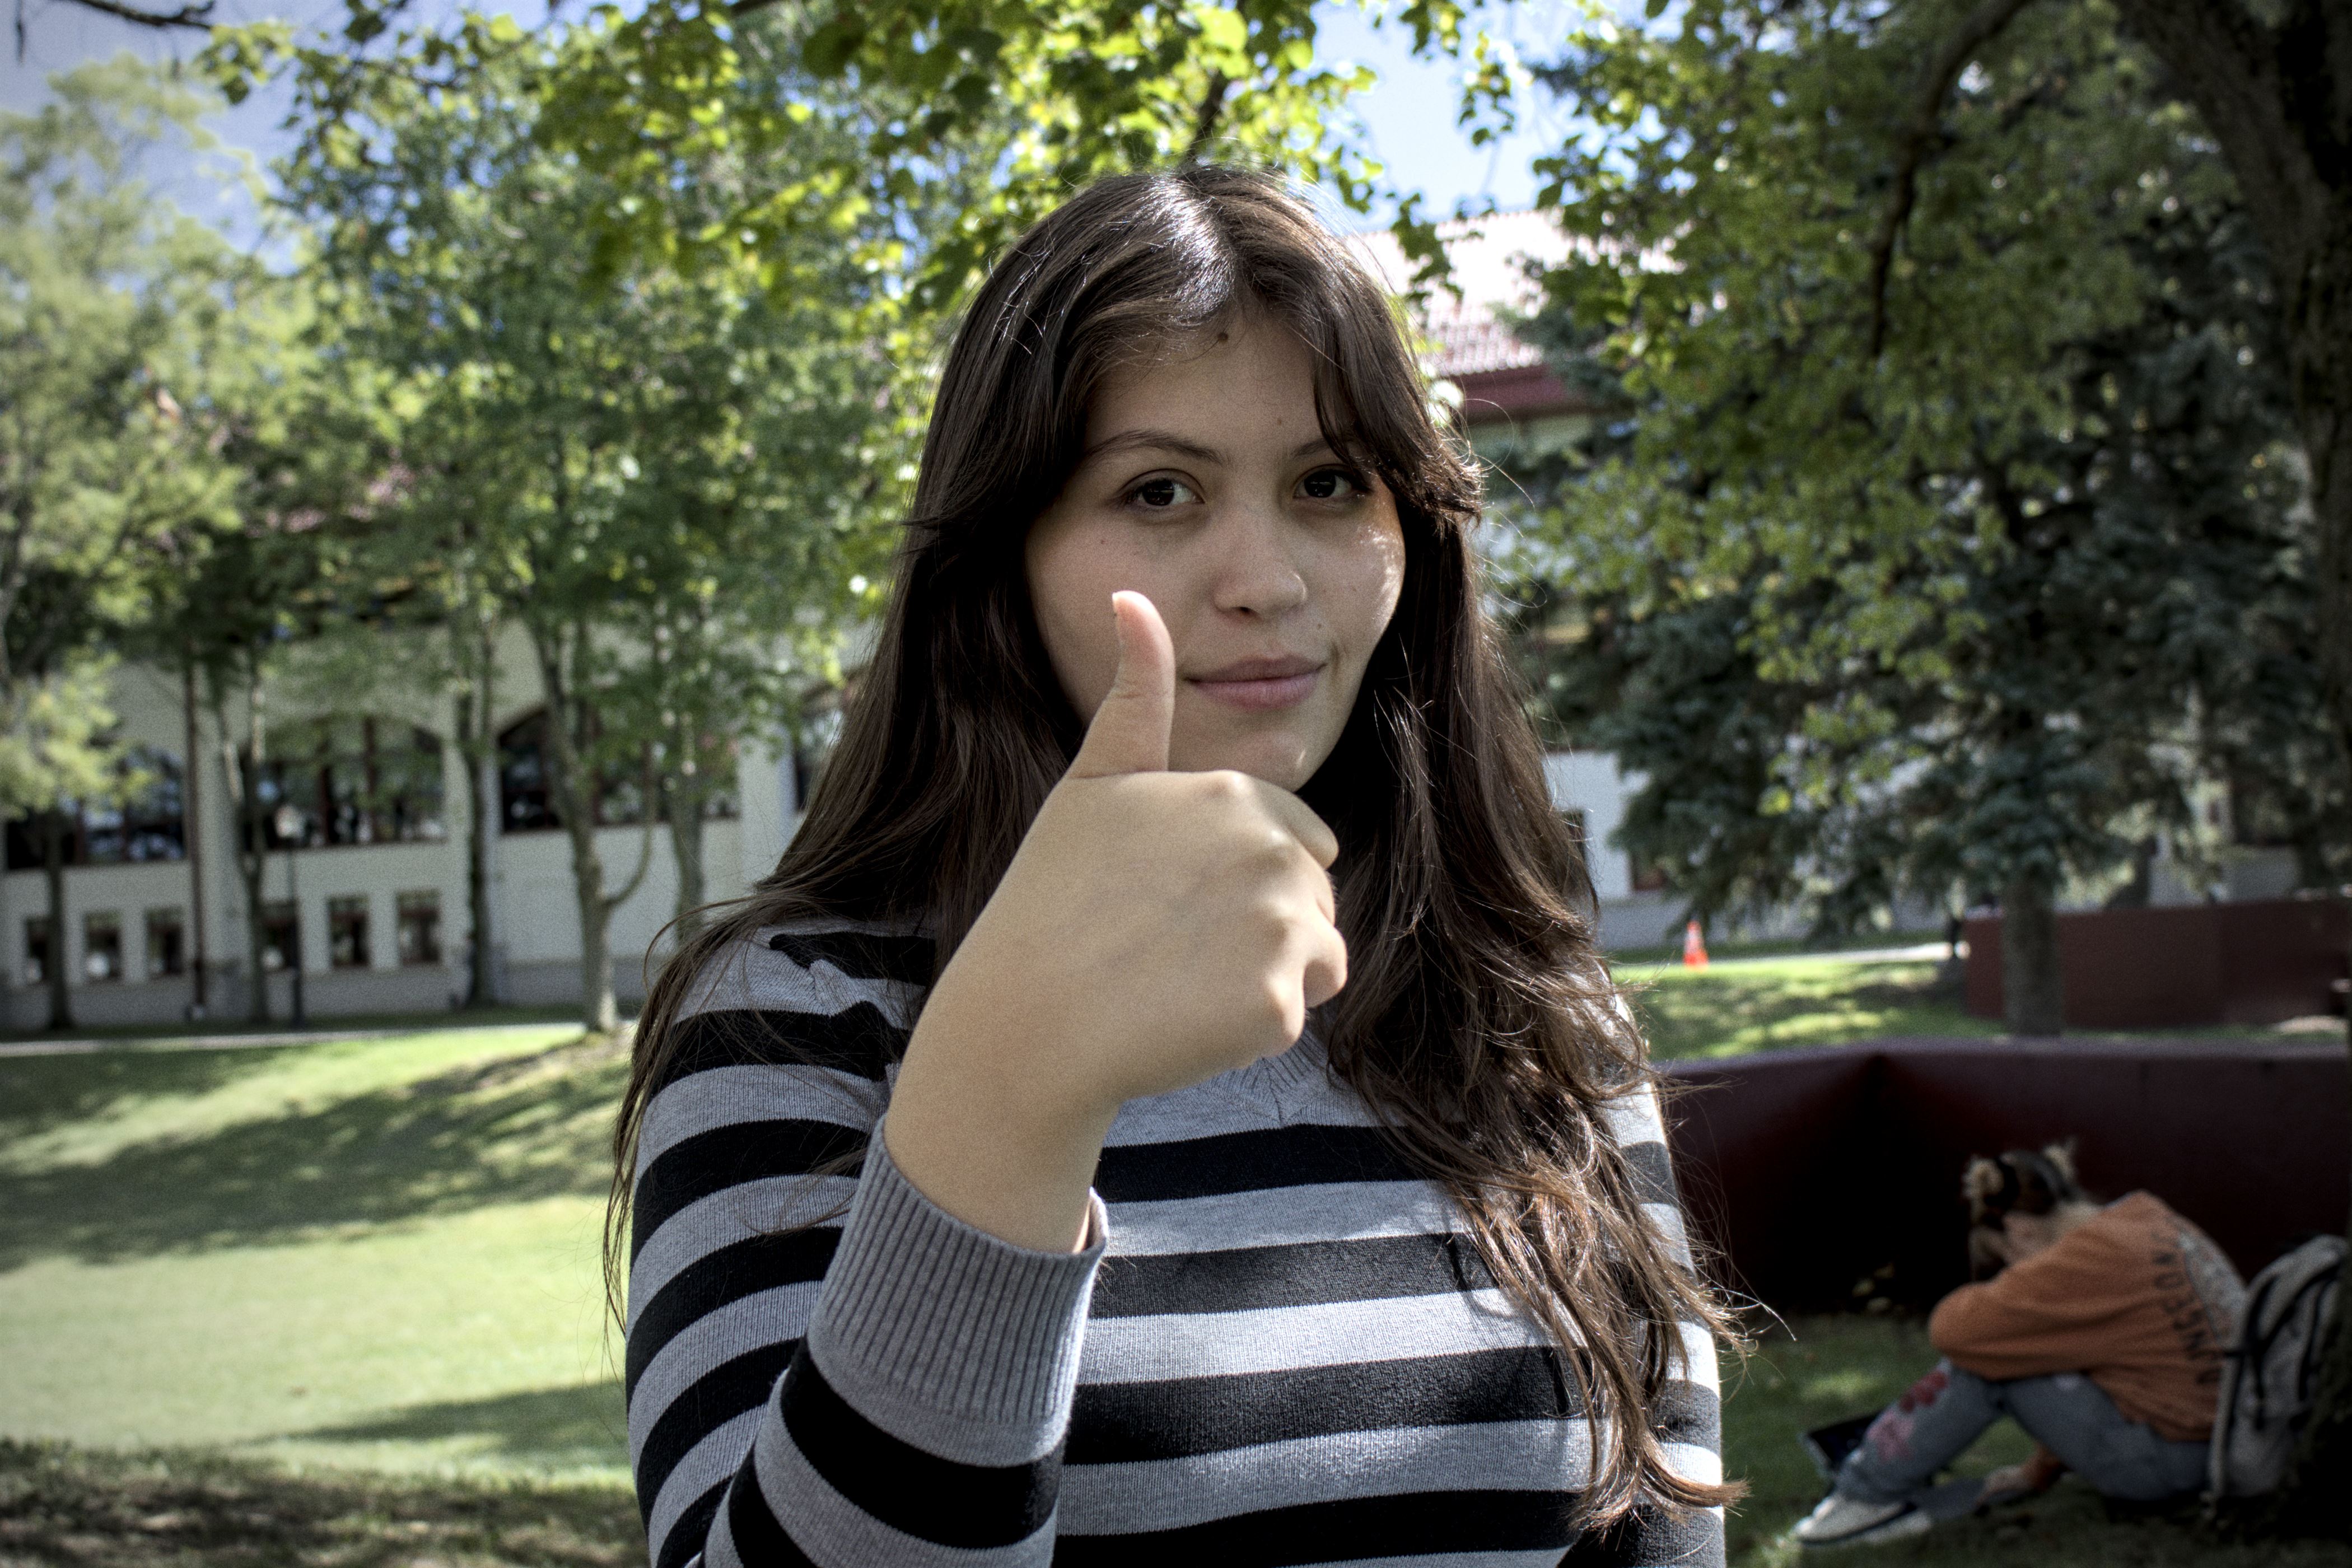 Girl with brown hair down past her shoulders poses with a thumbs up. She is wearing a gray and black striped shirt.